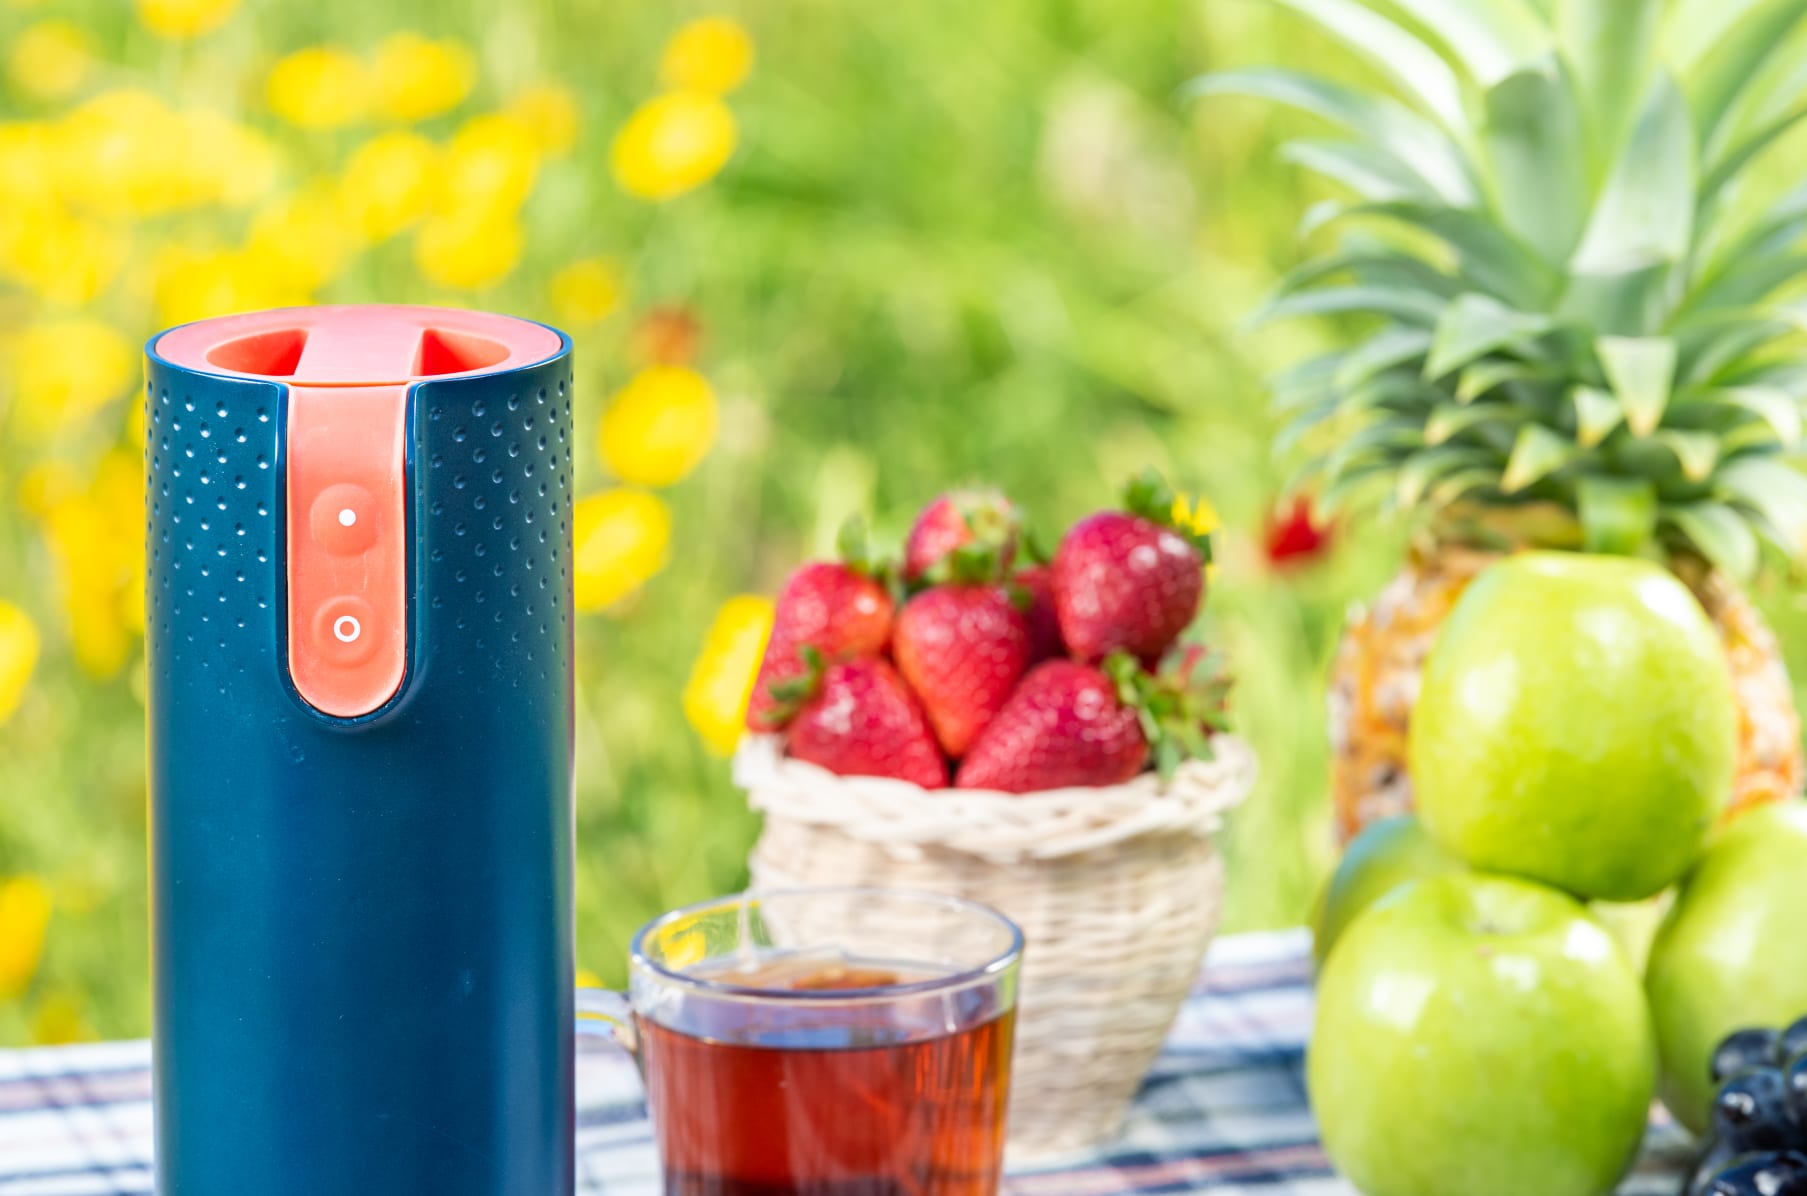 Kimos Vacuum-Insulated Bottle Doubles As A Portable Battery-Powered Kettle